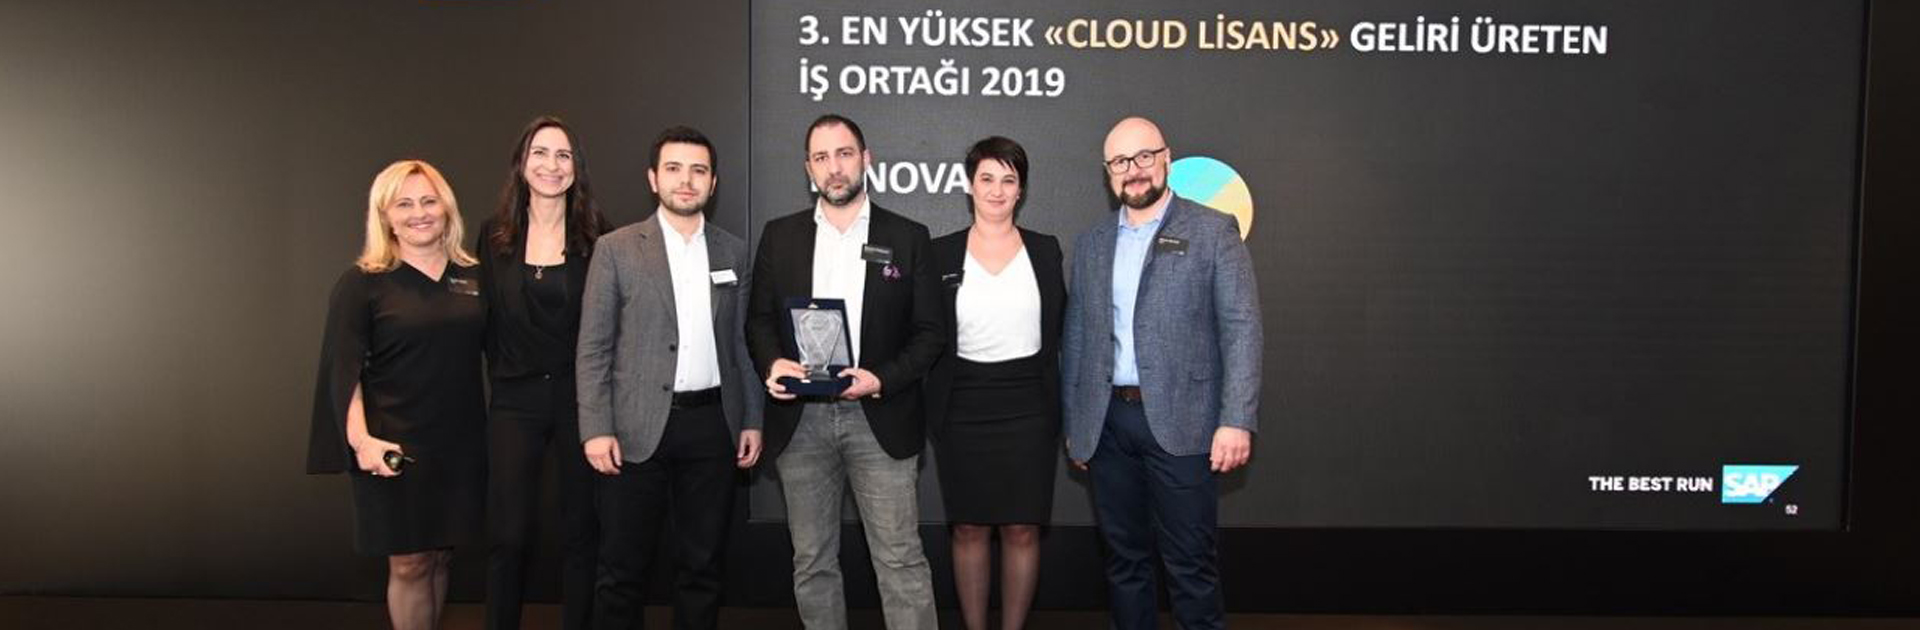 We Were Awarded as a Business Partner that Produces "Cloud Licences"